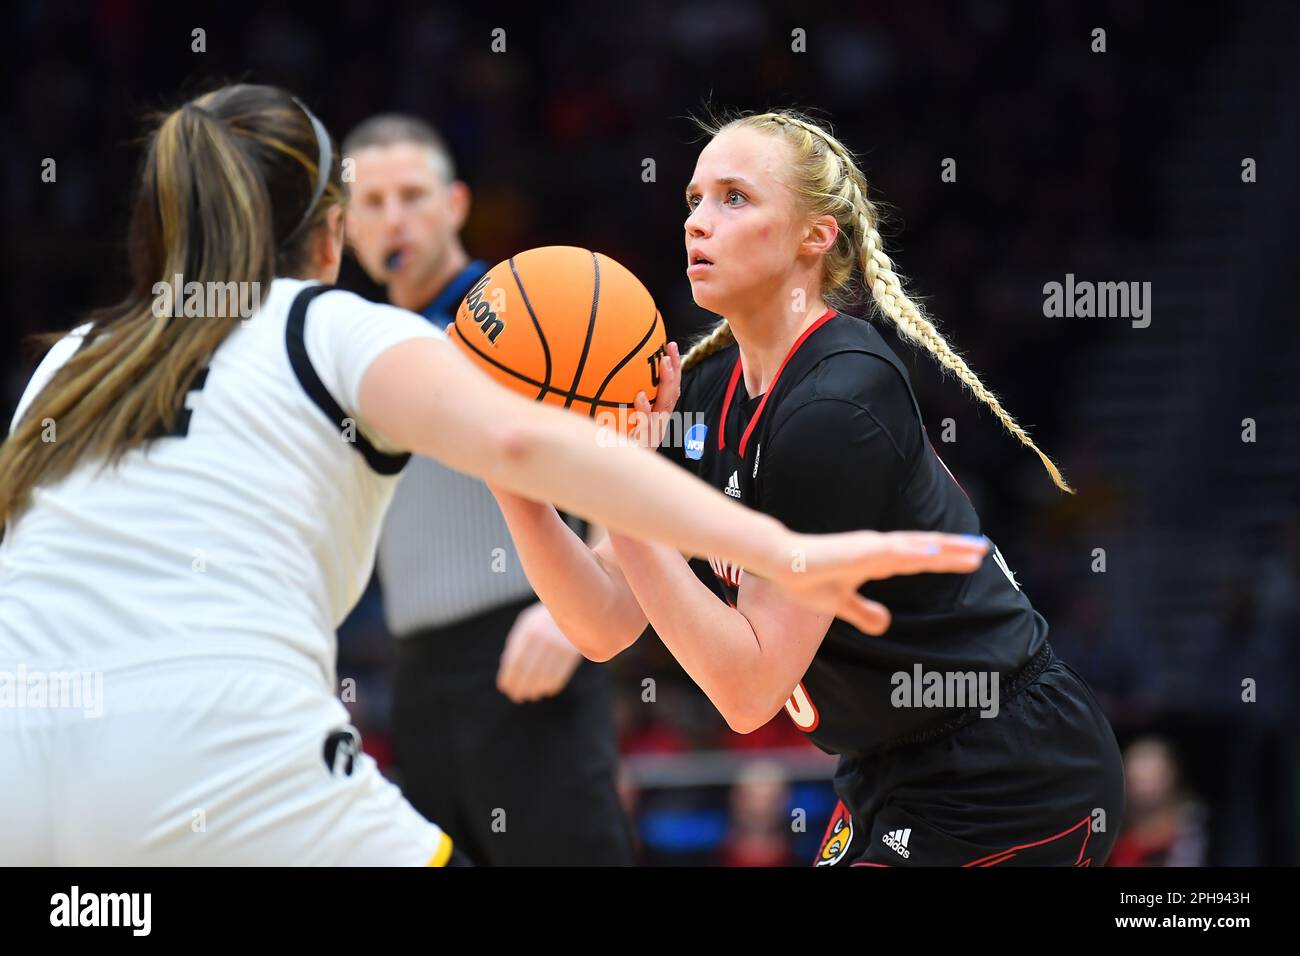 March 26, 2023: Louisville Cardinals guard Hailey Van Lith (10) eyes the basket in preparation for a shot during the NCAA women's NCAA Regional Final basketball game between Louisville and Iowa at Climate Pledge Arena in Seattle, WA. Iowa defeated Louisville 97-83 to advance to the Final 4. Steve Faber/CSM Stock Photo